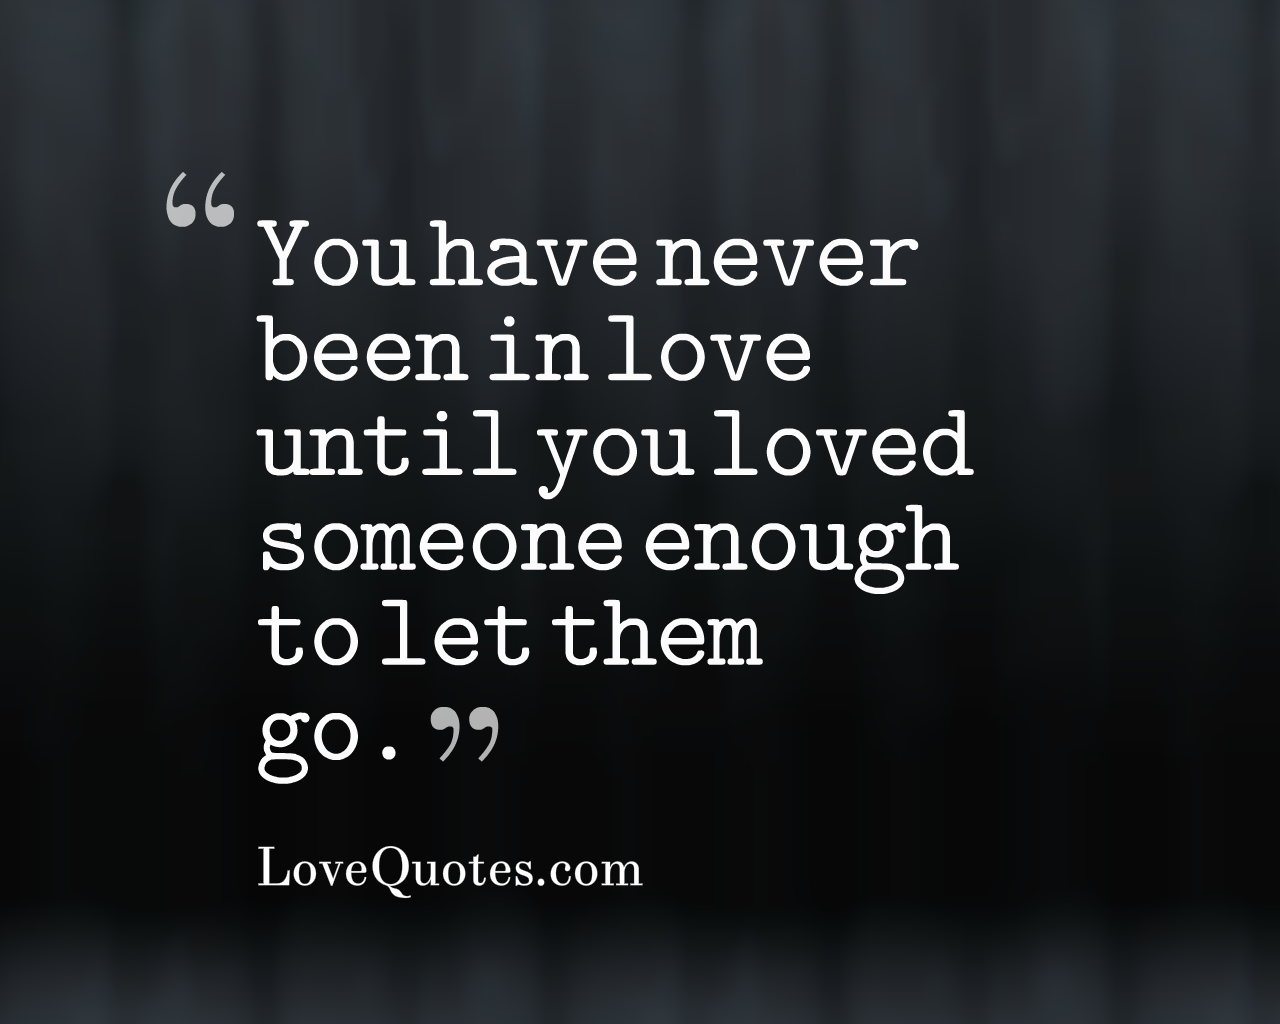 Loved Someone Enough